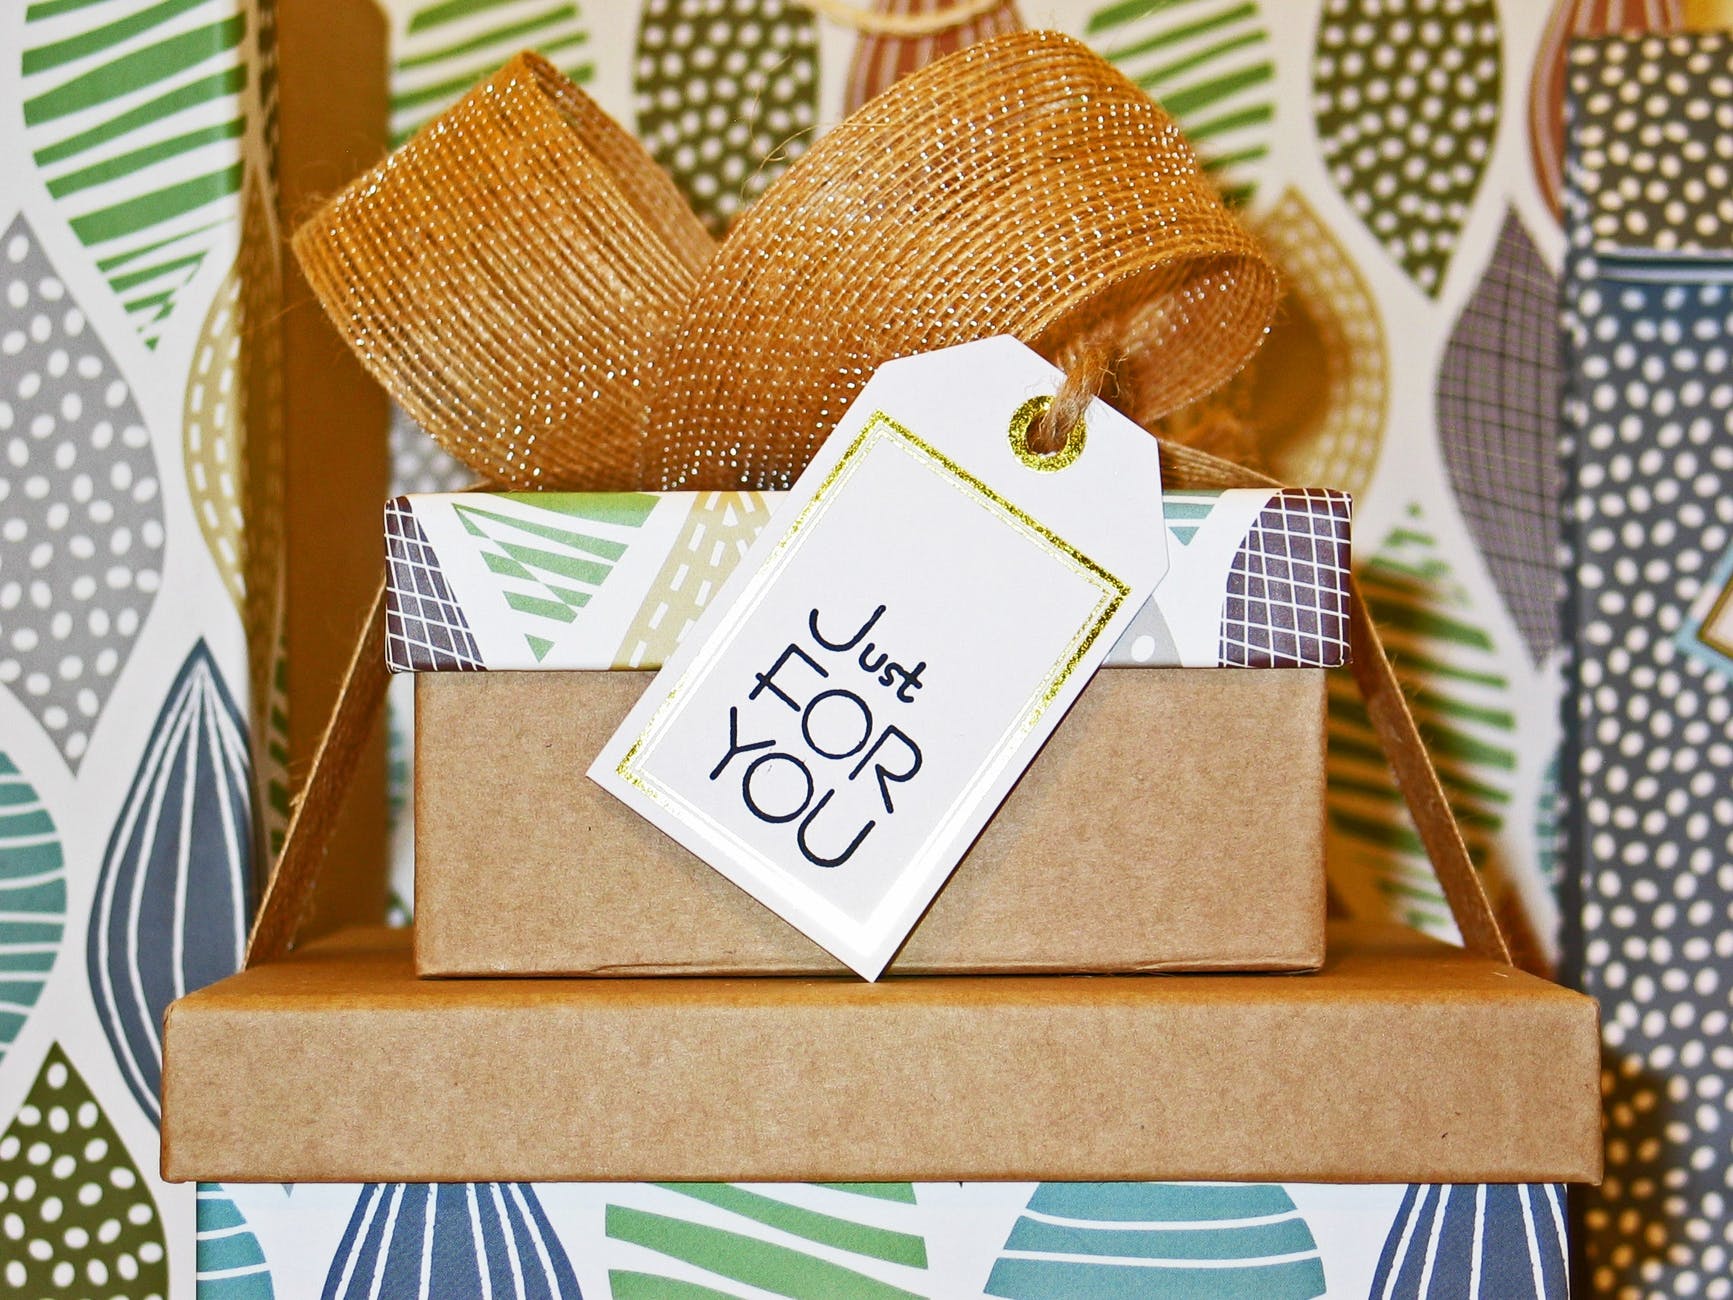 Fun and Loving Care Package Ideas For Friends and Family